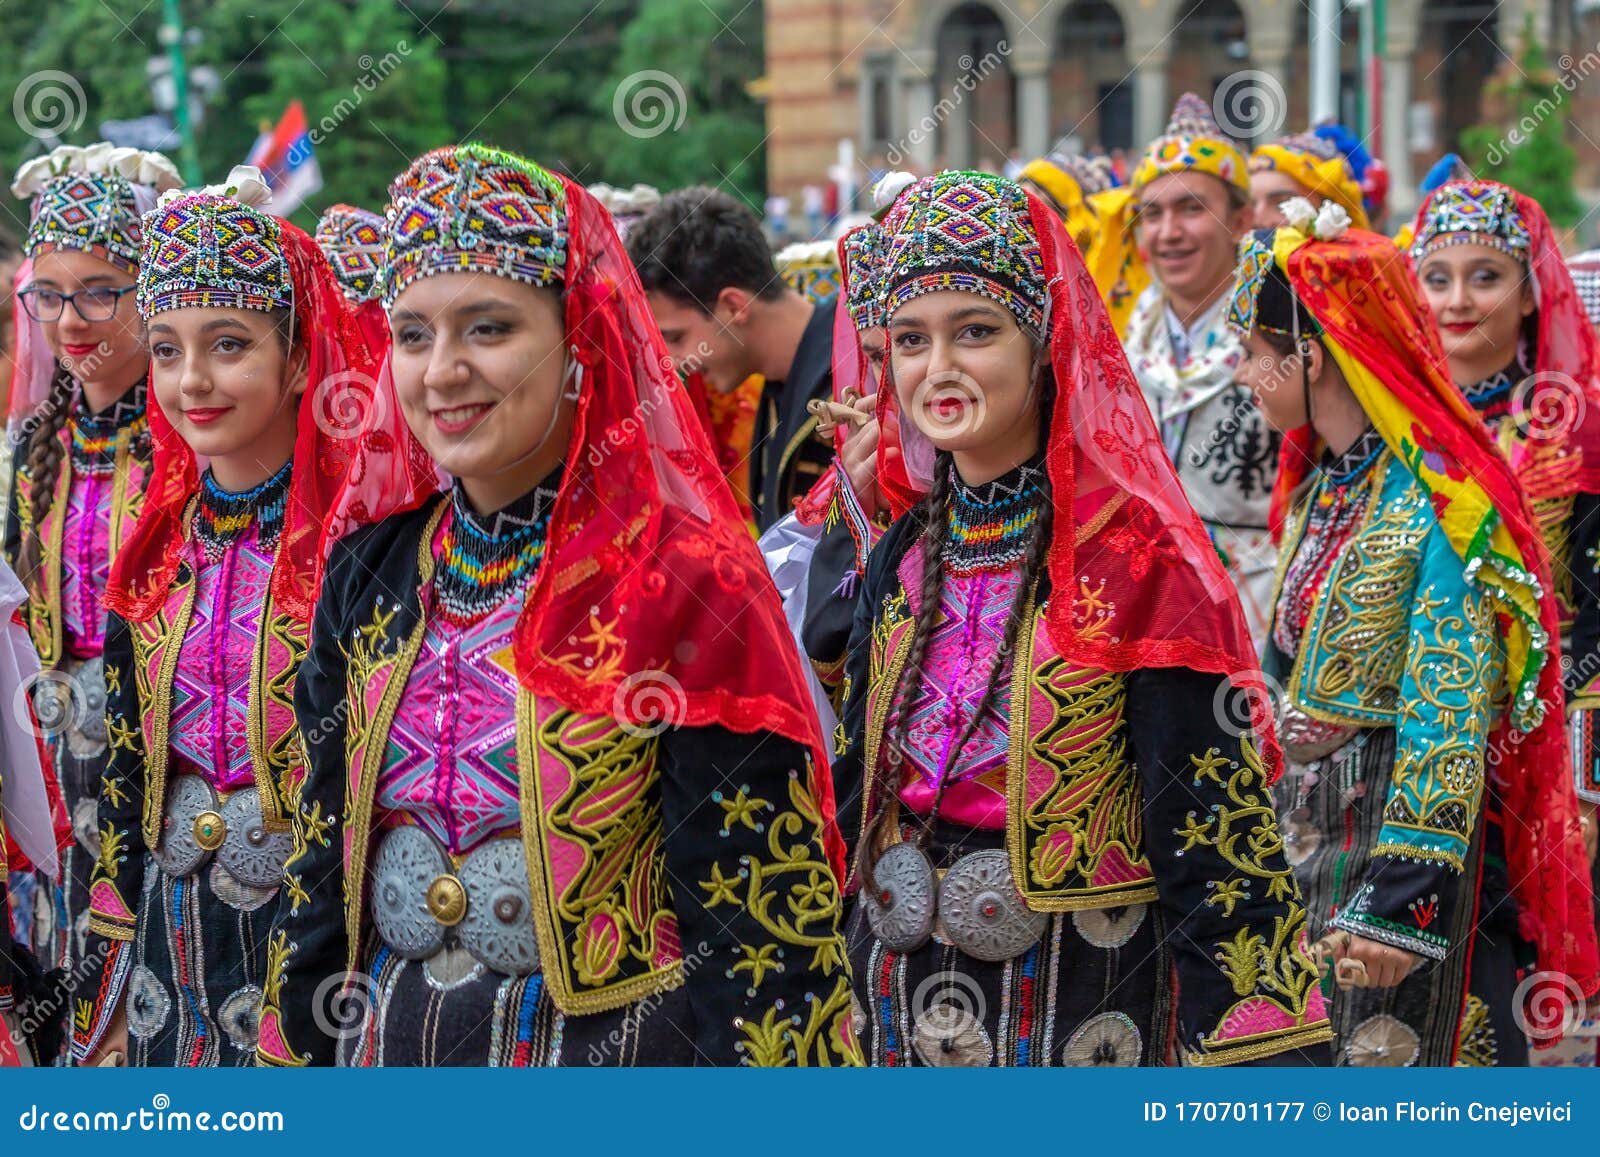 Dancers from Turkey in Traditional Costume Editorial Photography ...